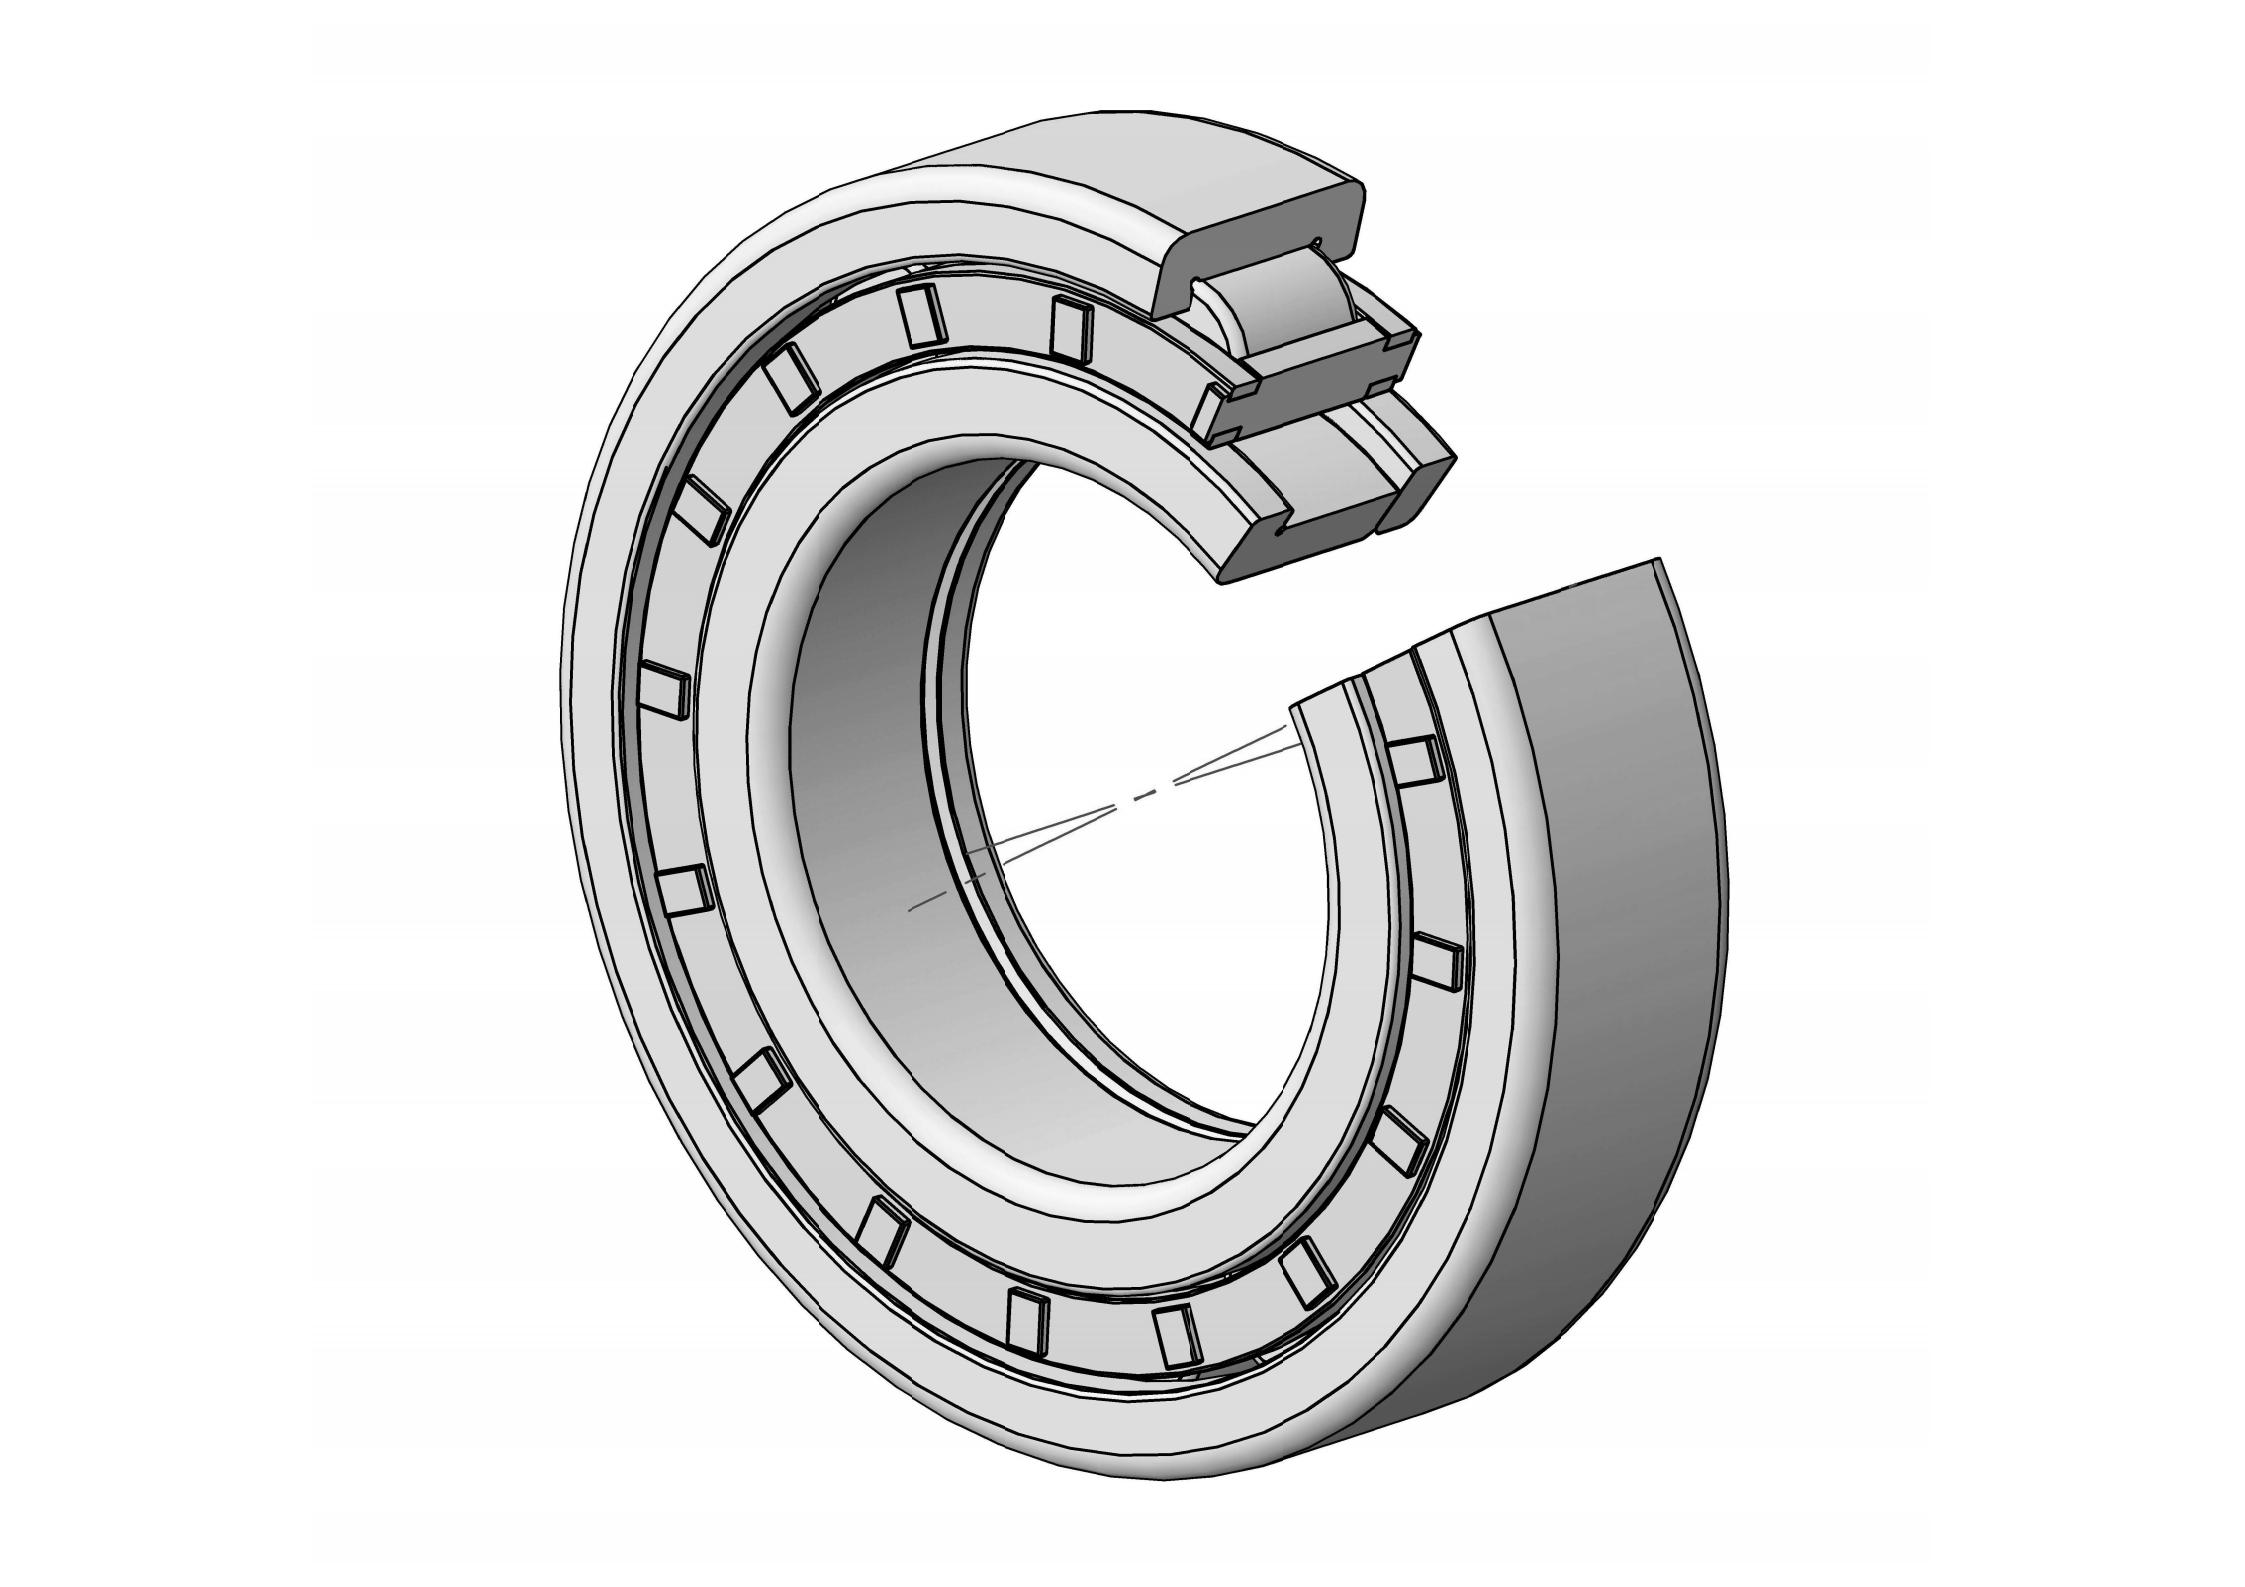 NUP2328-EM Single Row Cylindrical roller bearing 